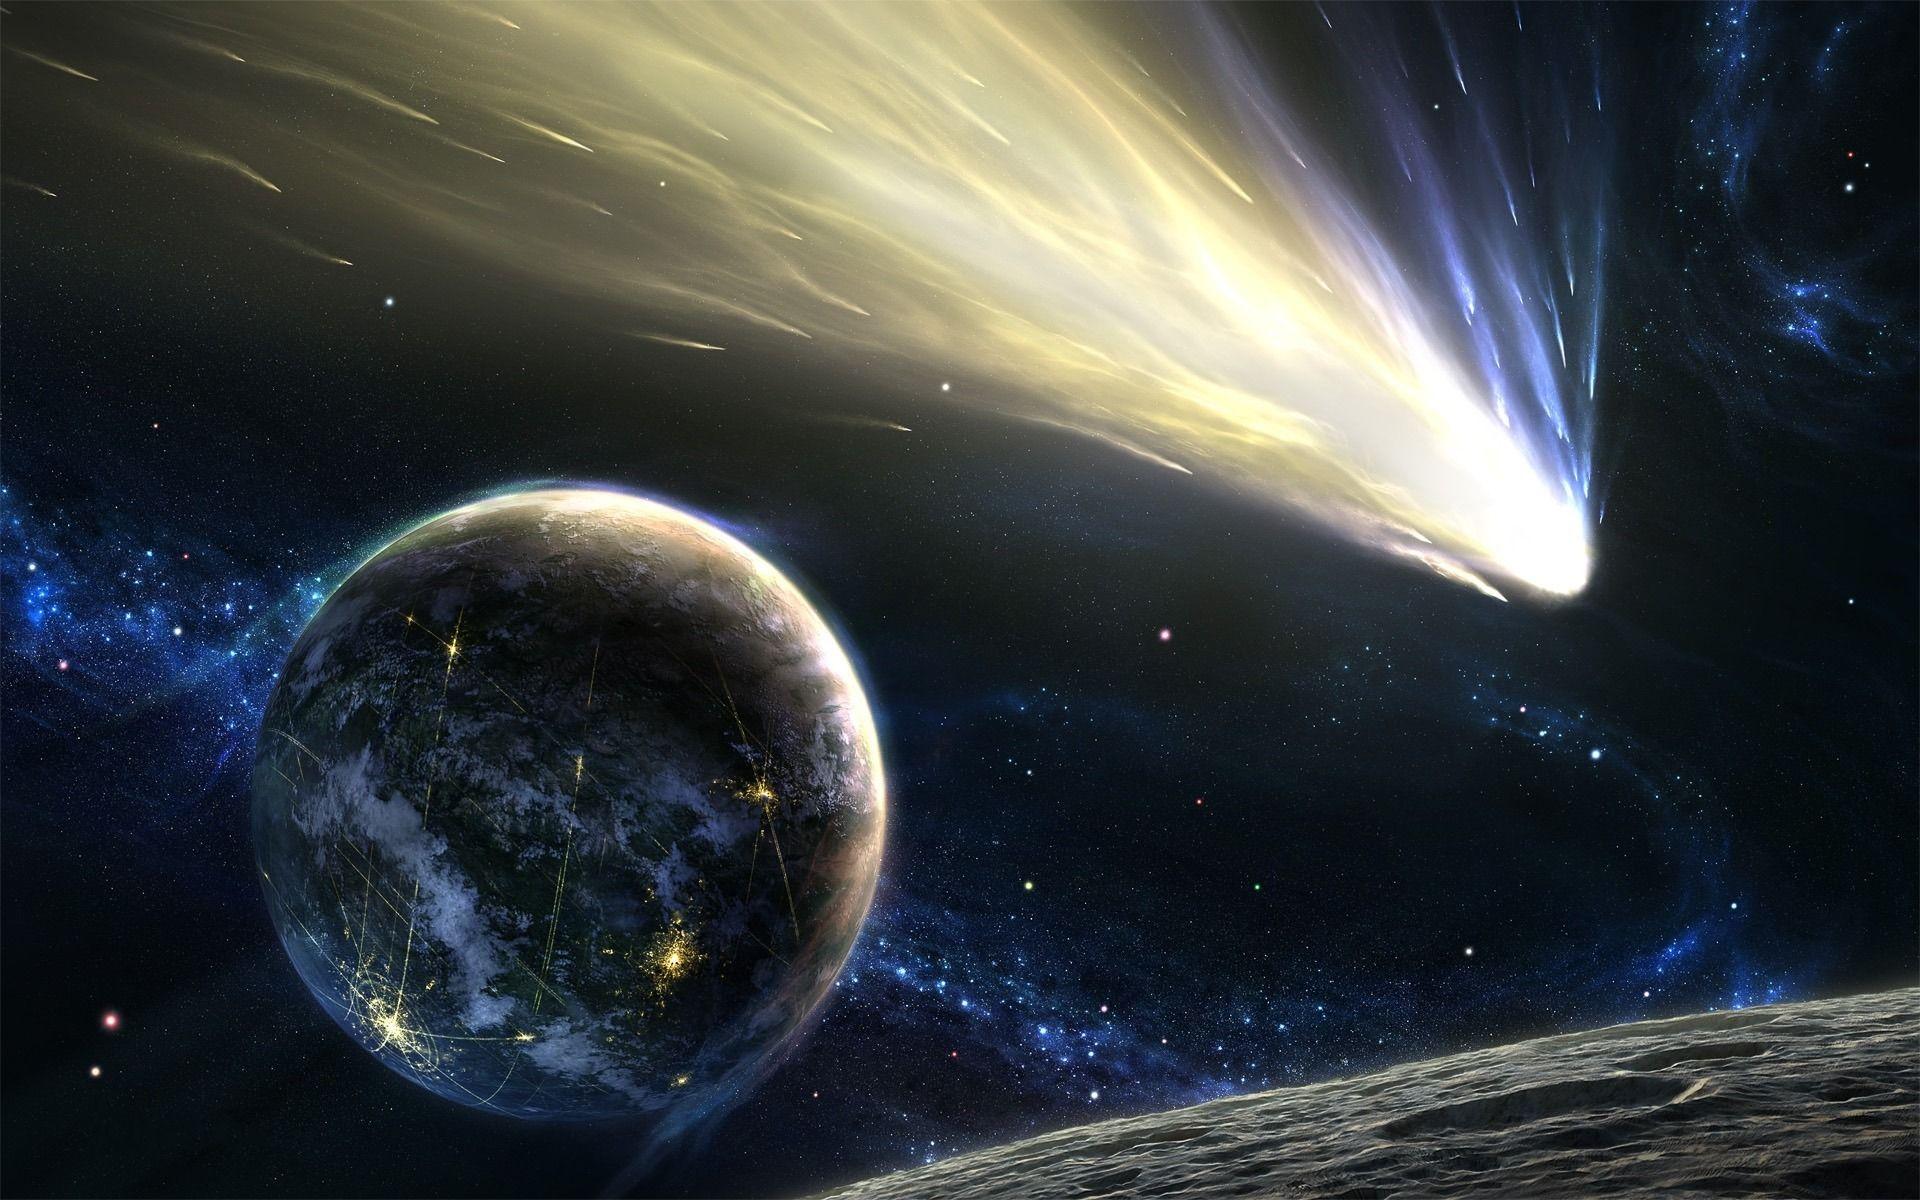 Comets And Asteroids Wallpaper about space. Image